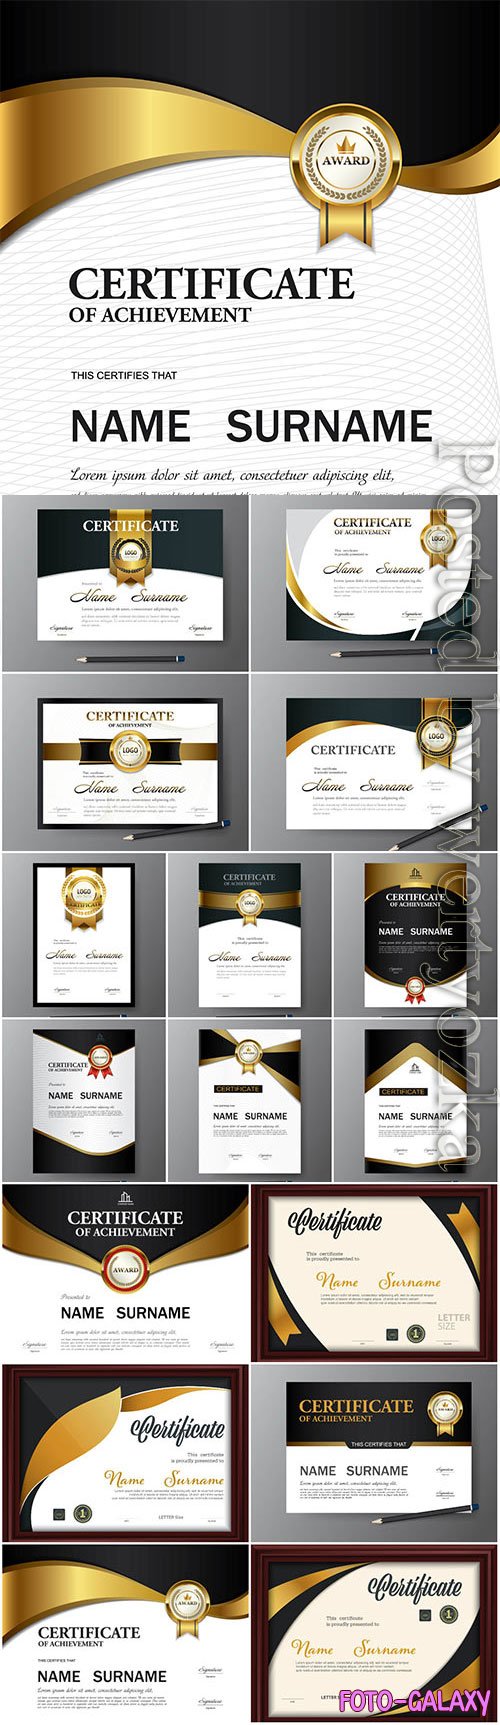 Diplomas and certificates with gold design in vector